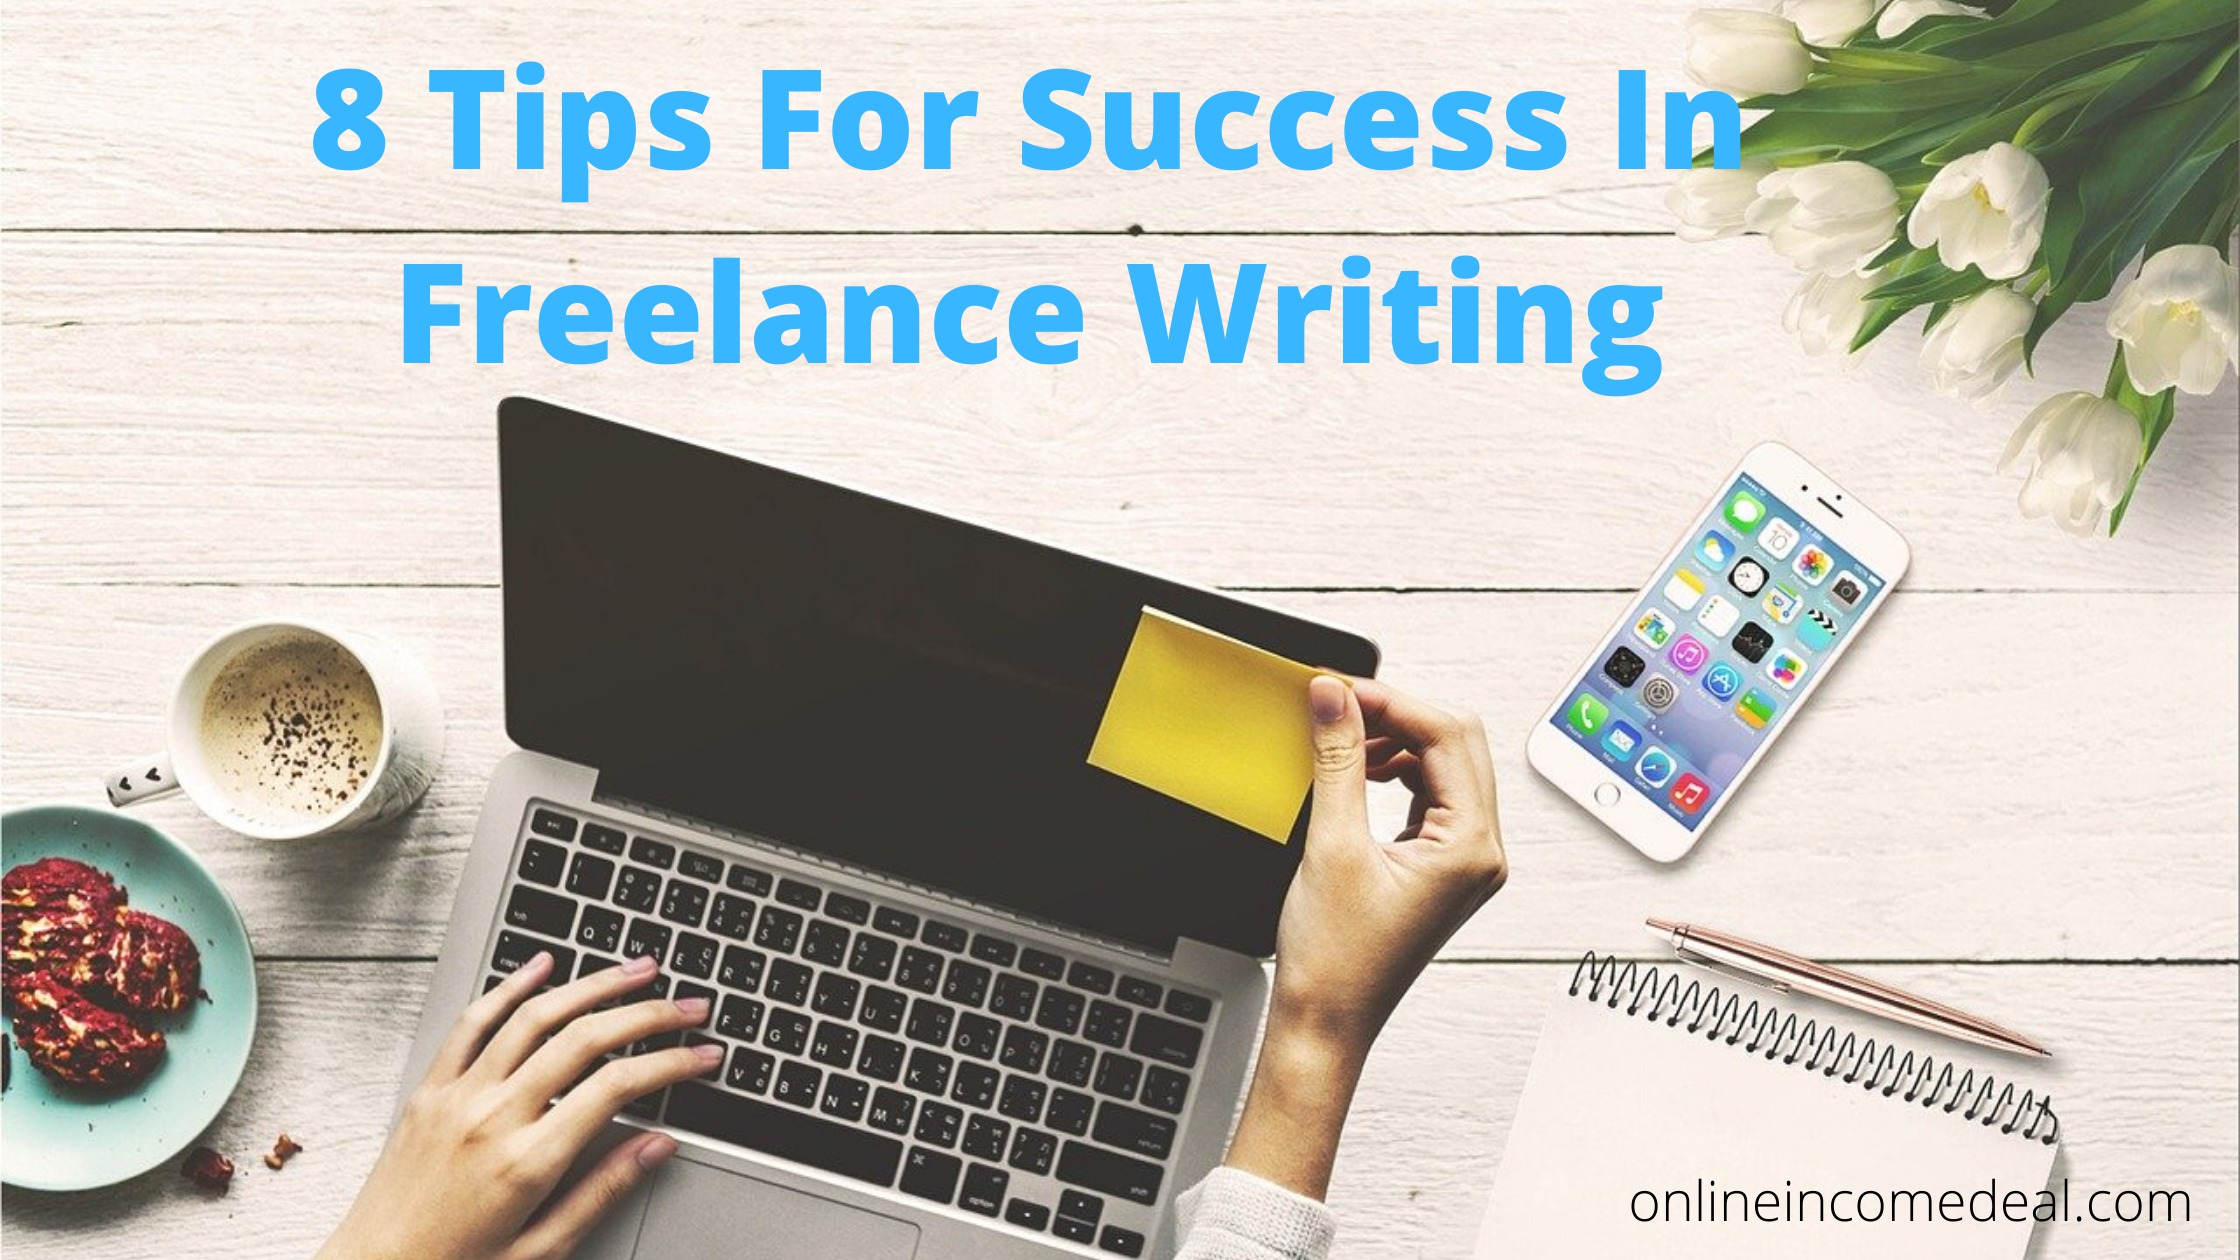 Tips for success in freelance writing